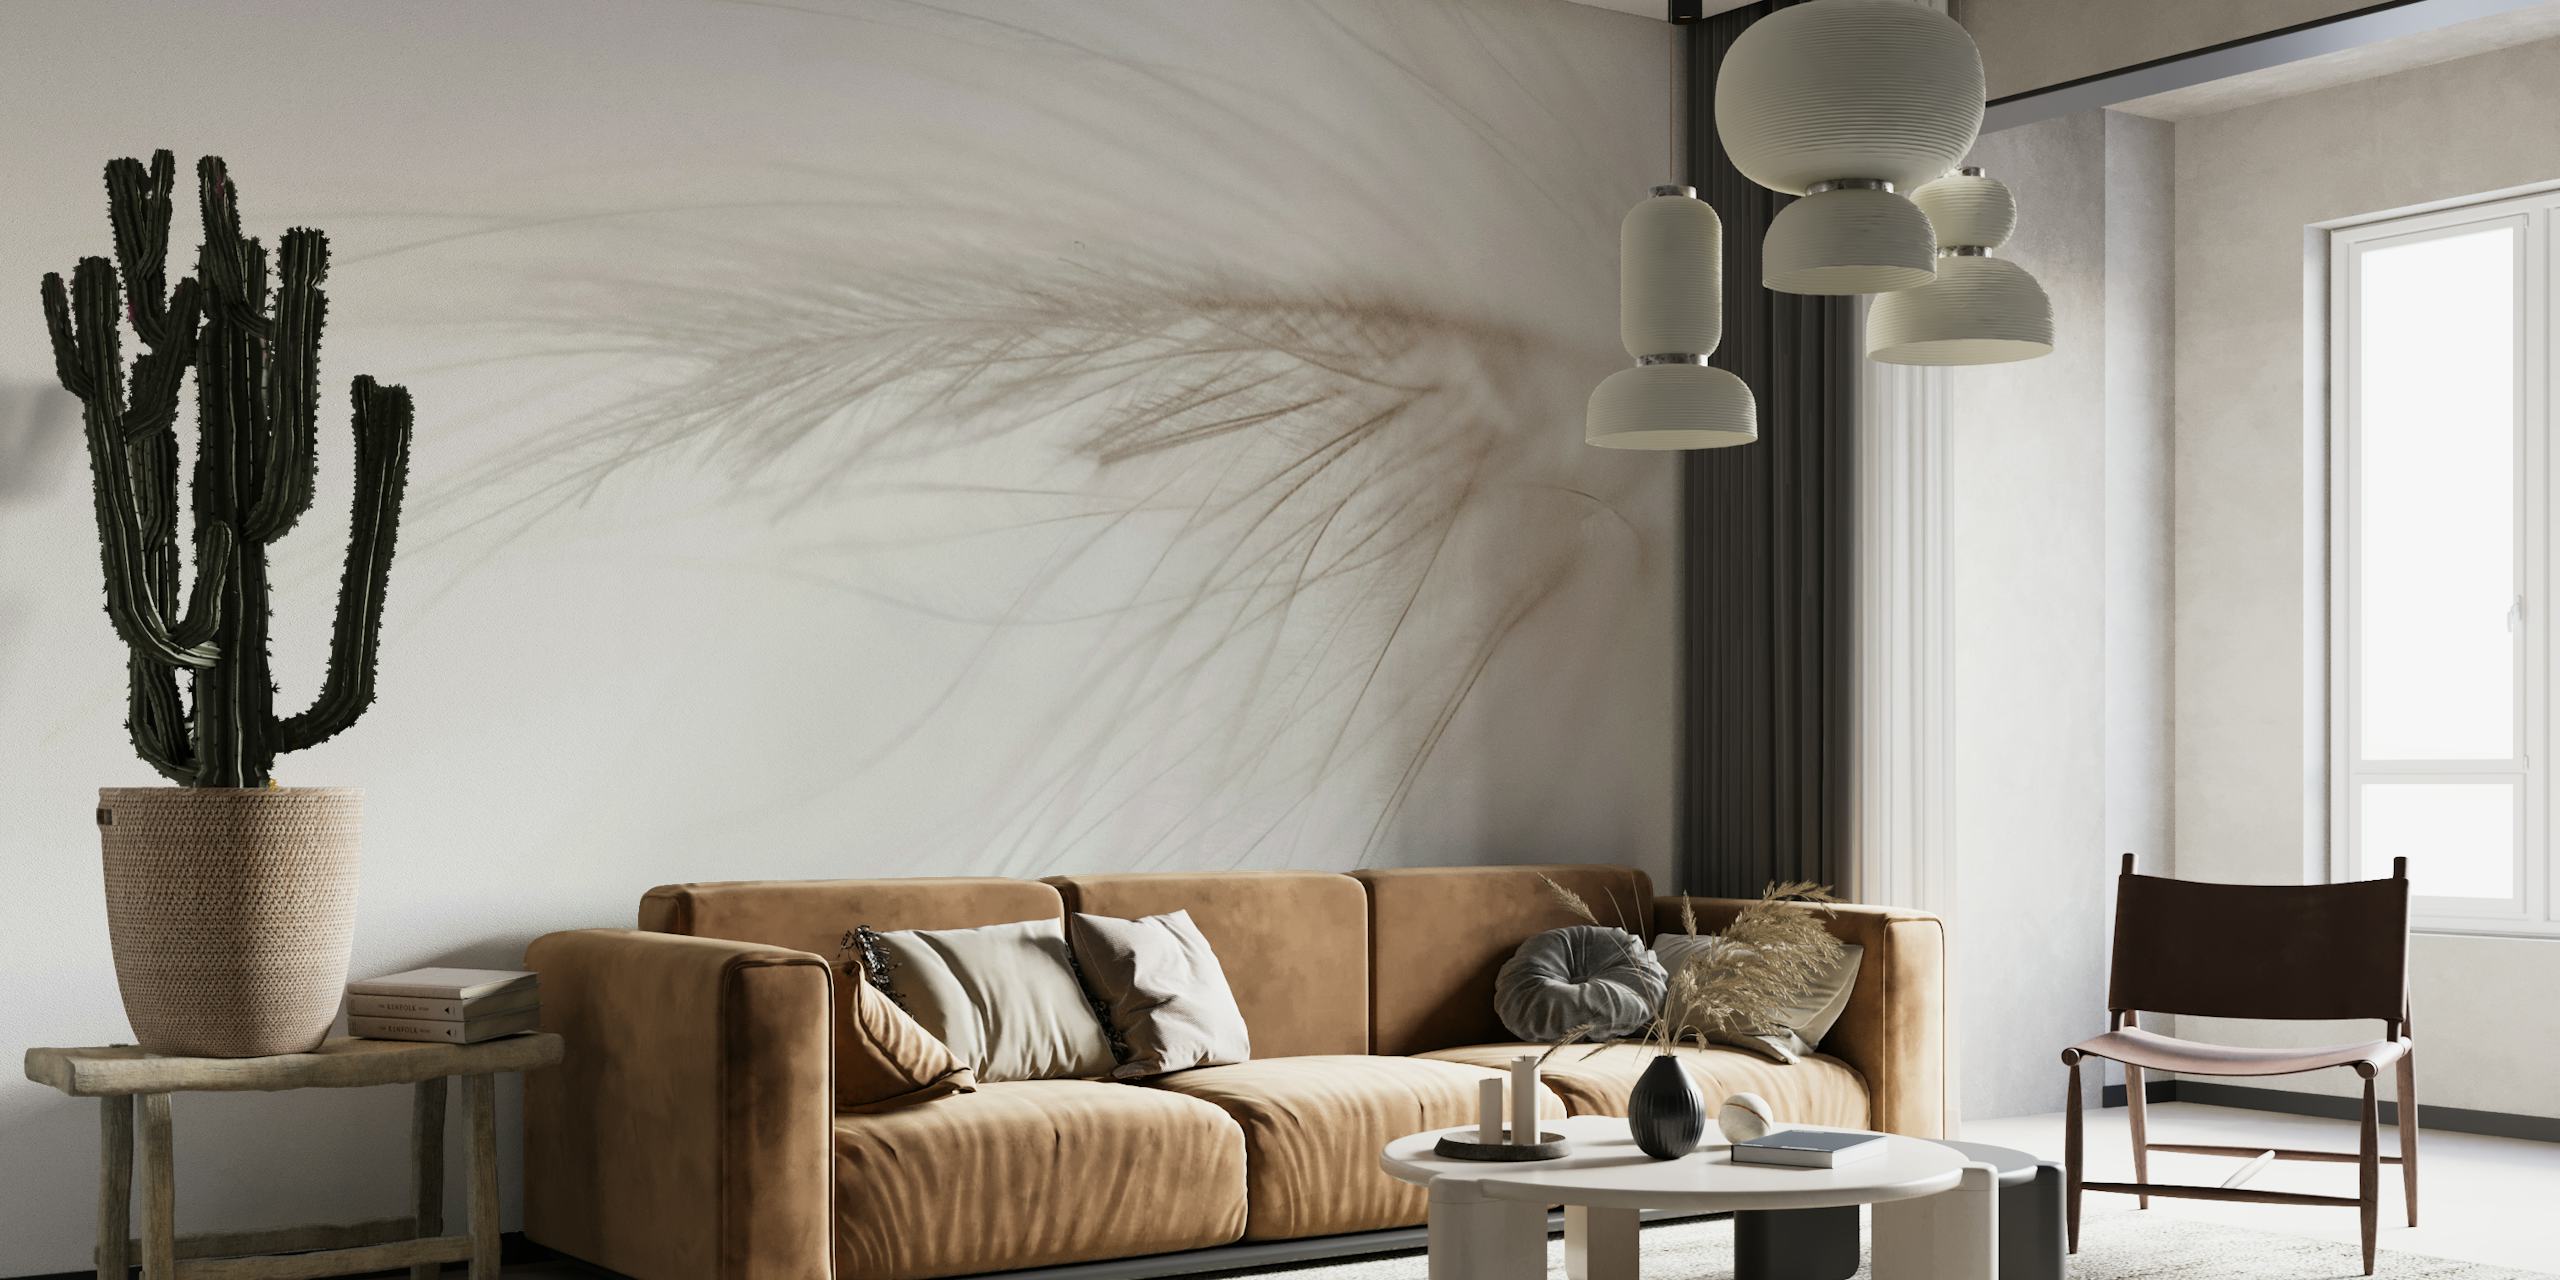 White feather close-up wall mural for peaceful interior decor